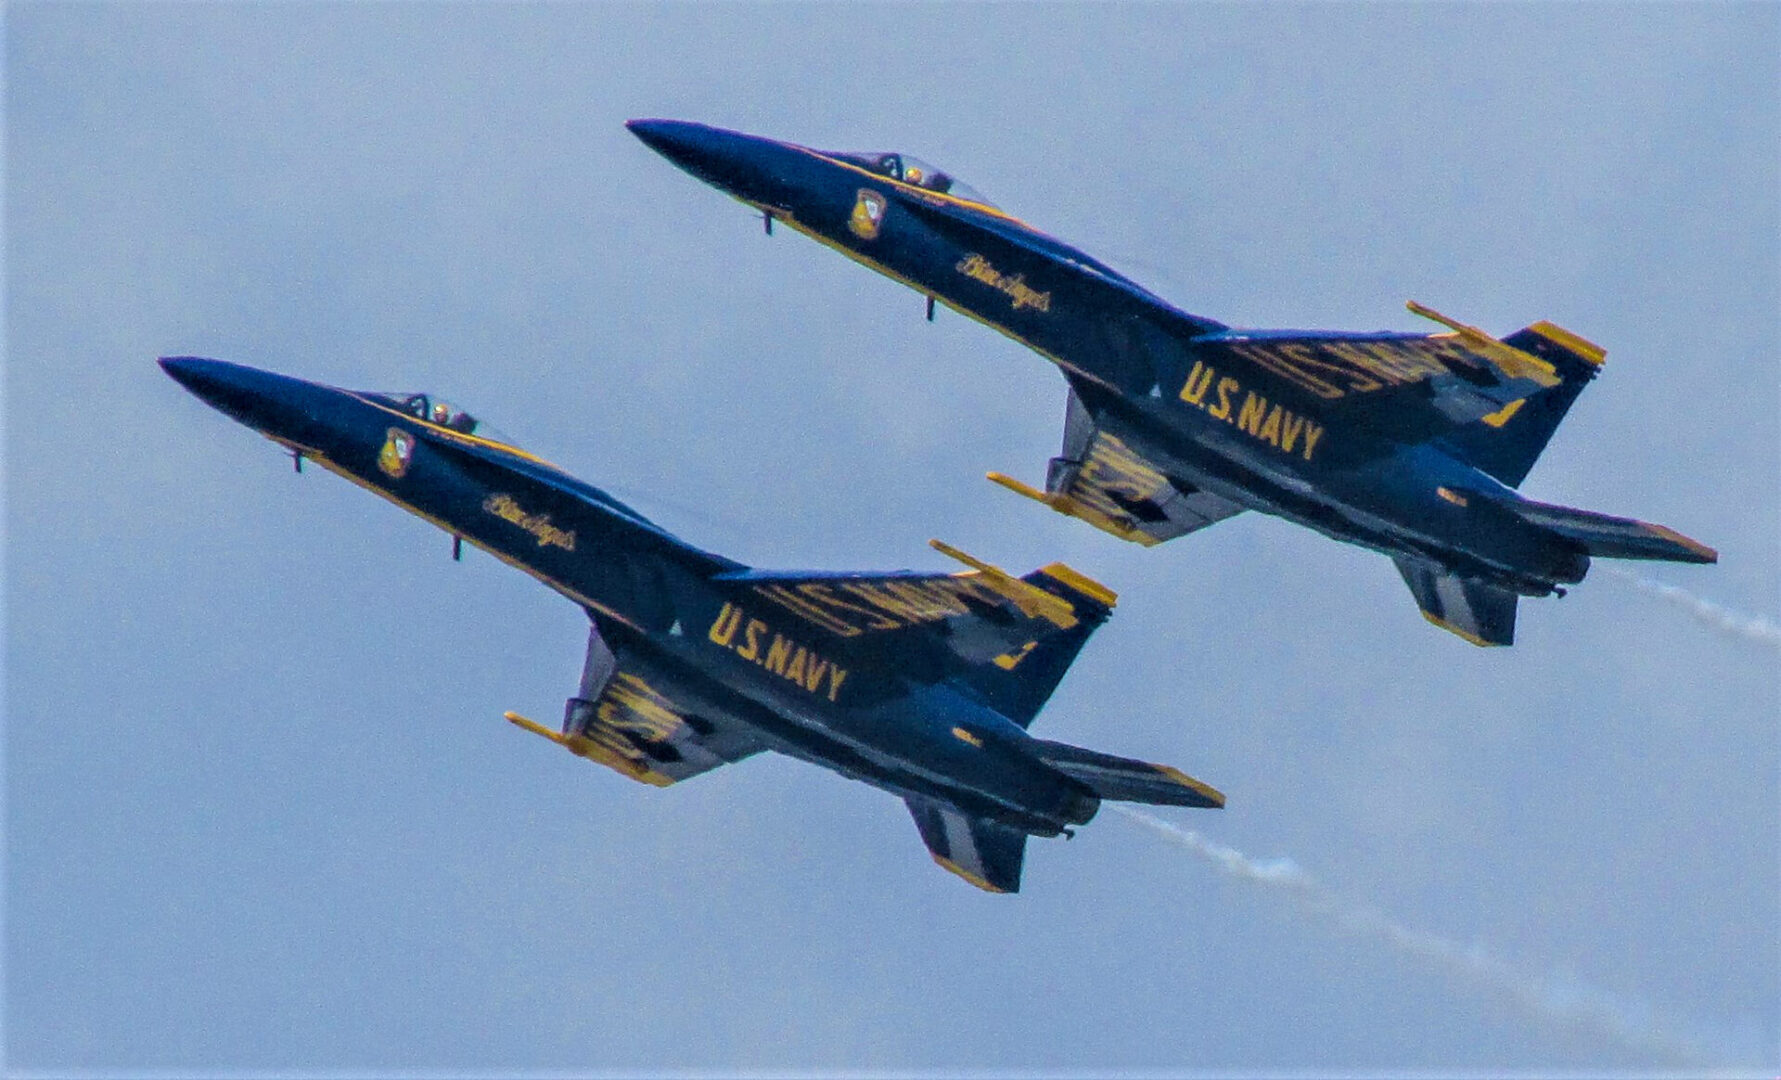 Two blue angels jets flying in formation.